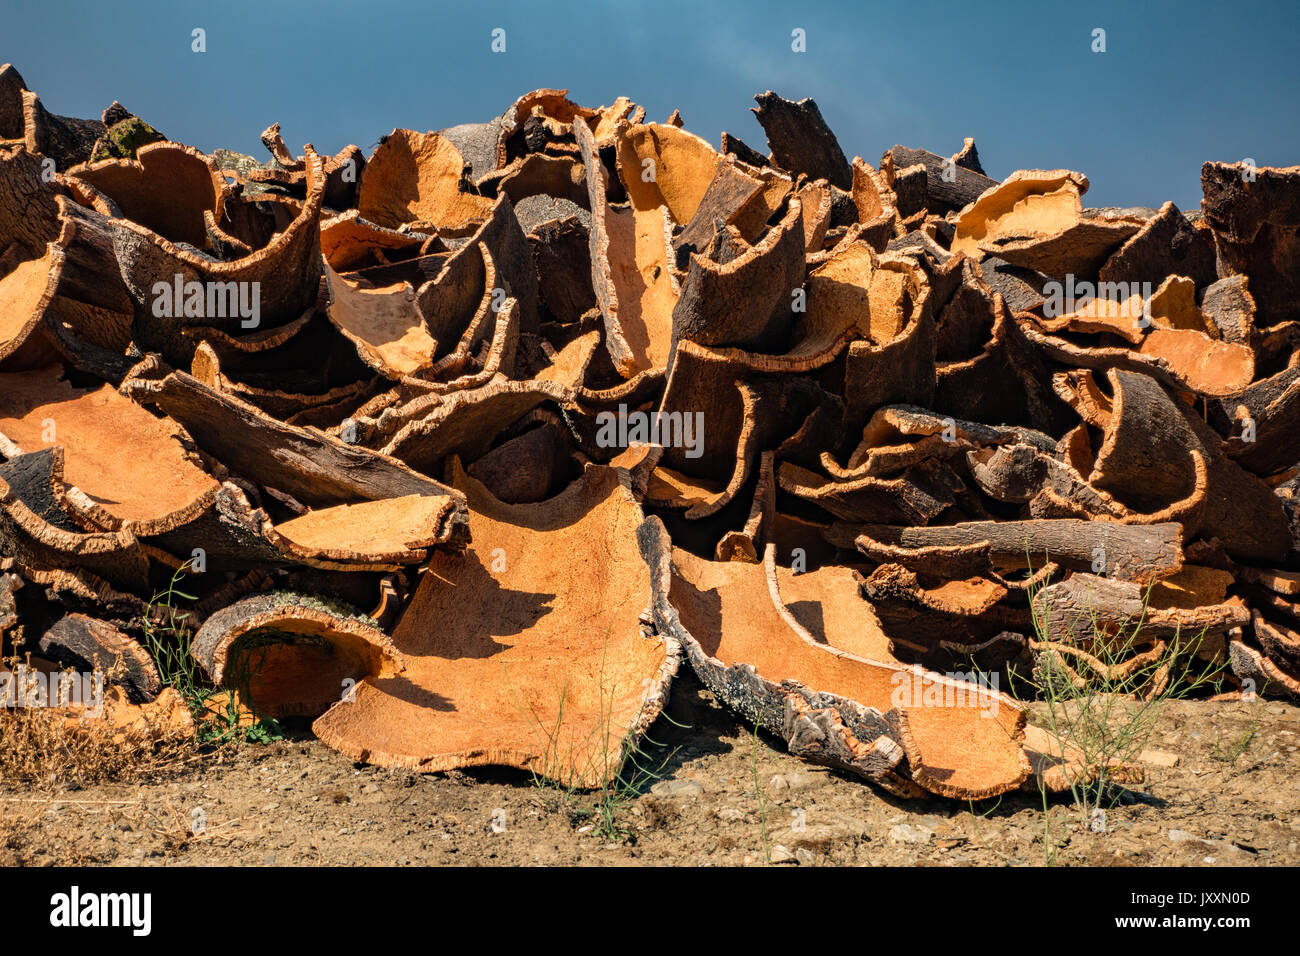 Raw cork sits in a pile, waiting transport to a processing plant in the Douro Valley, Portugal Stock Photo